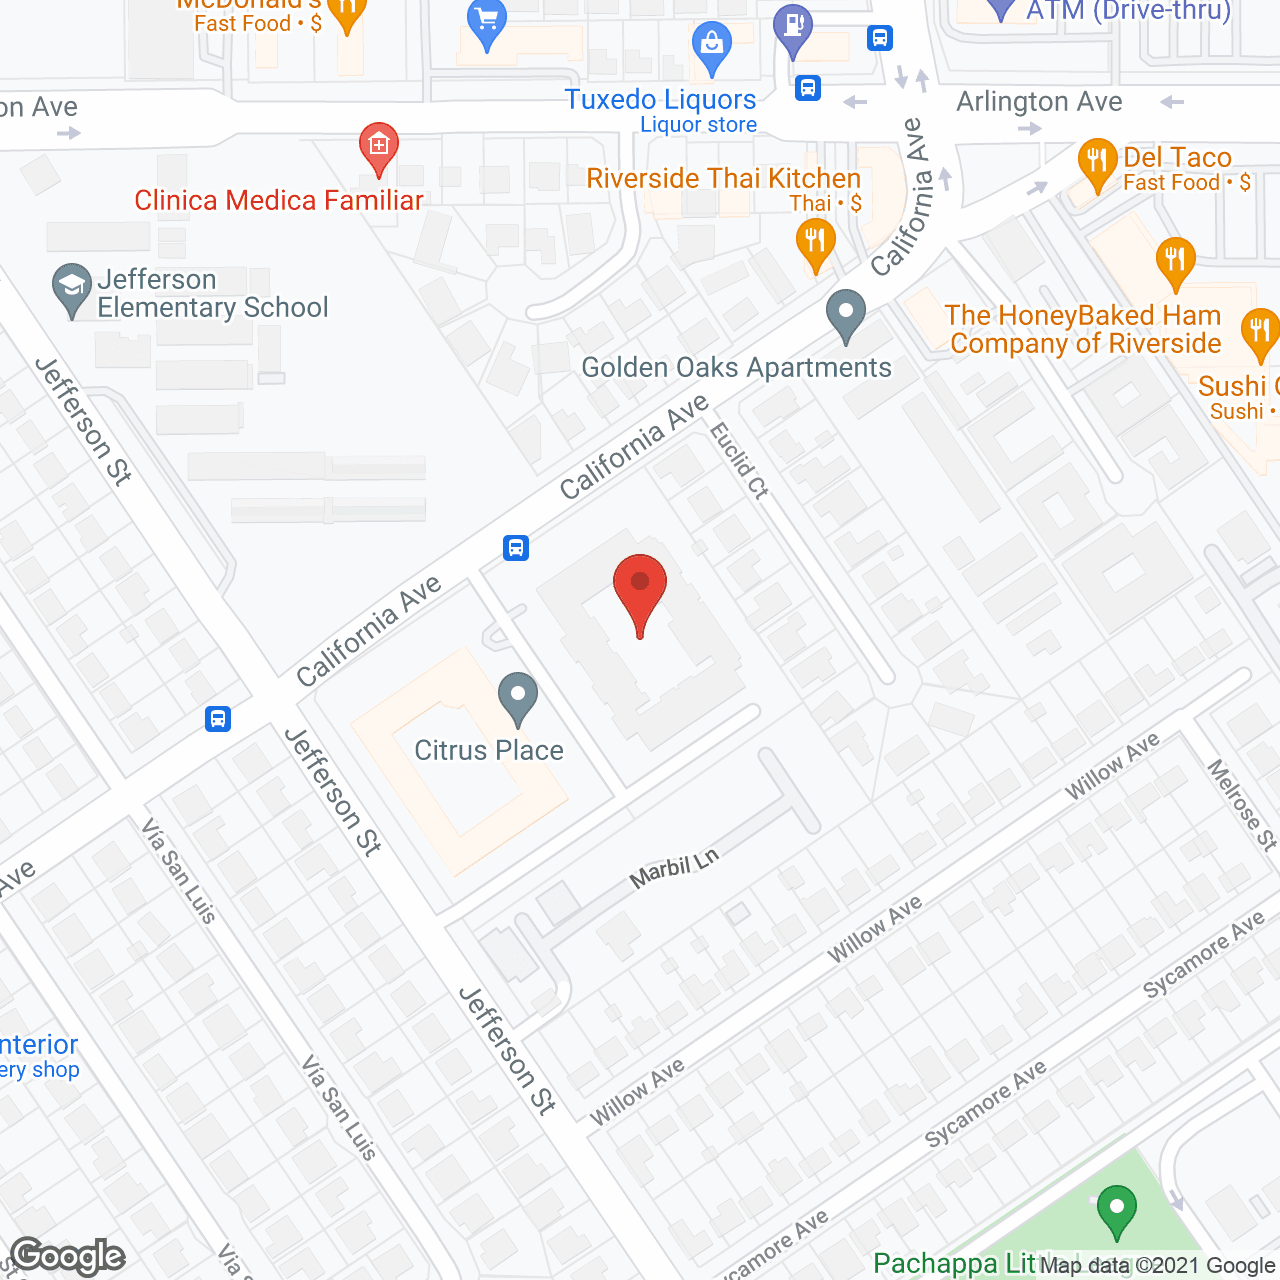 Citrus Place in google map